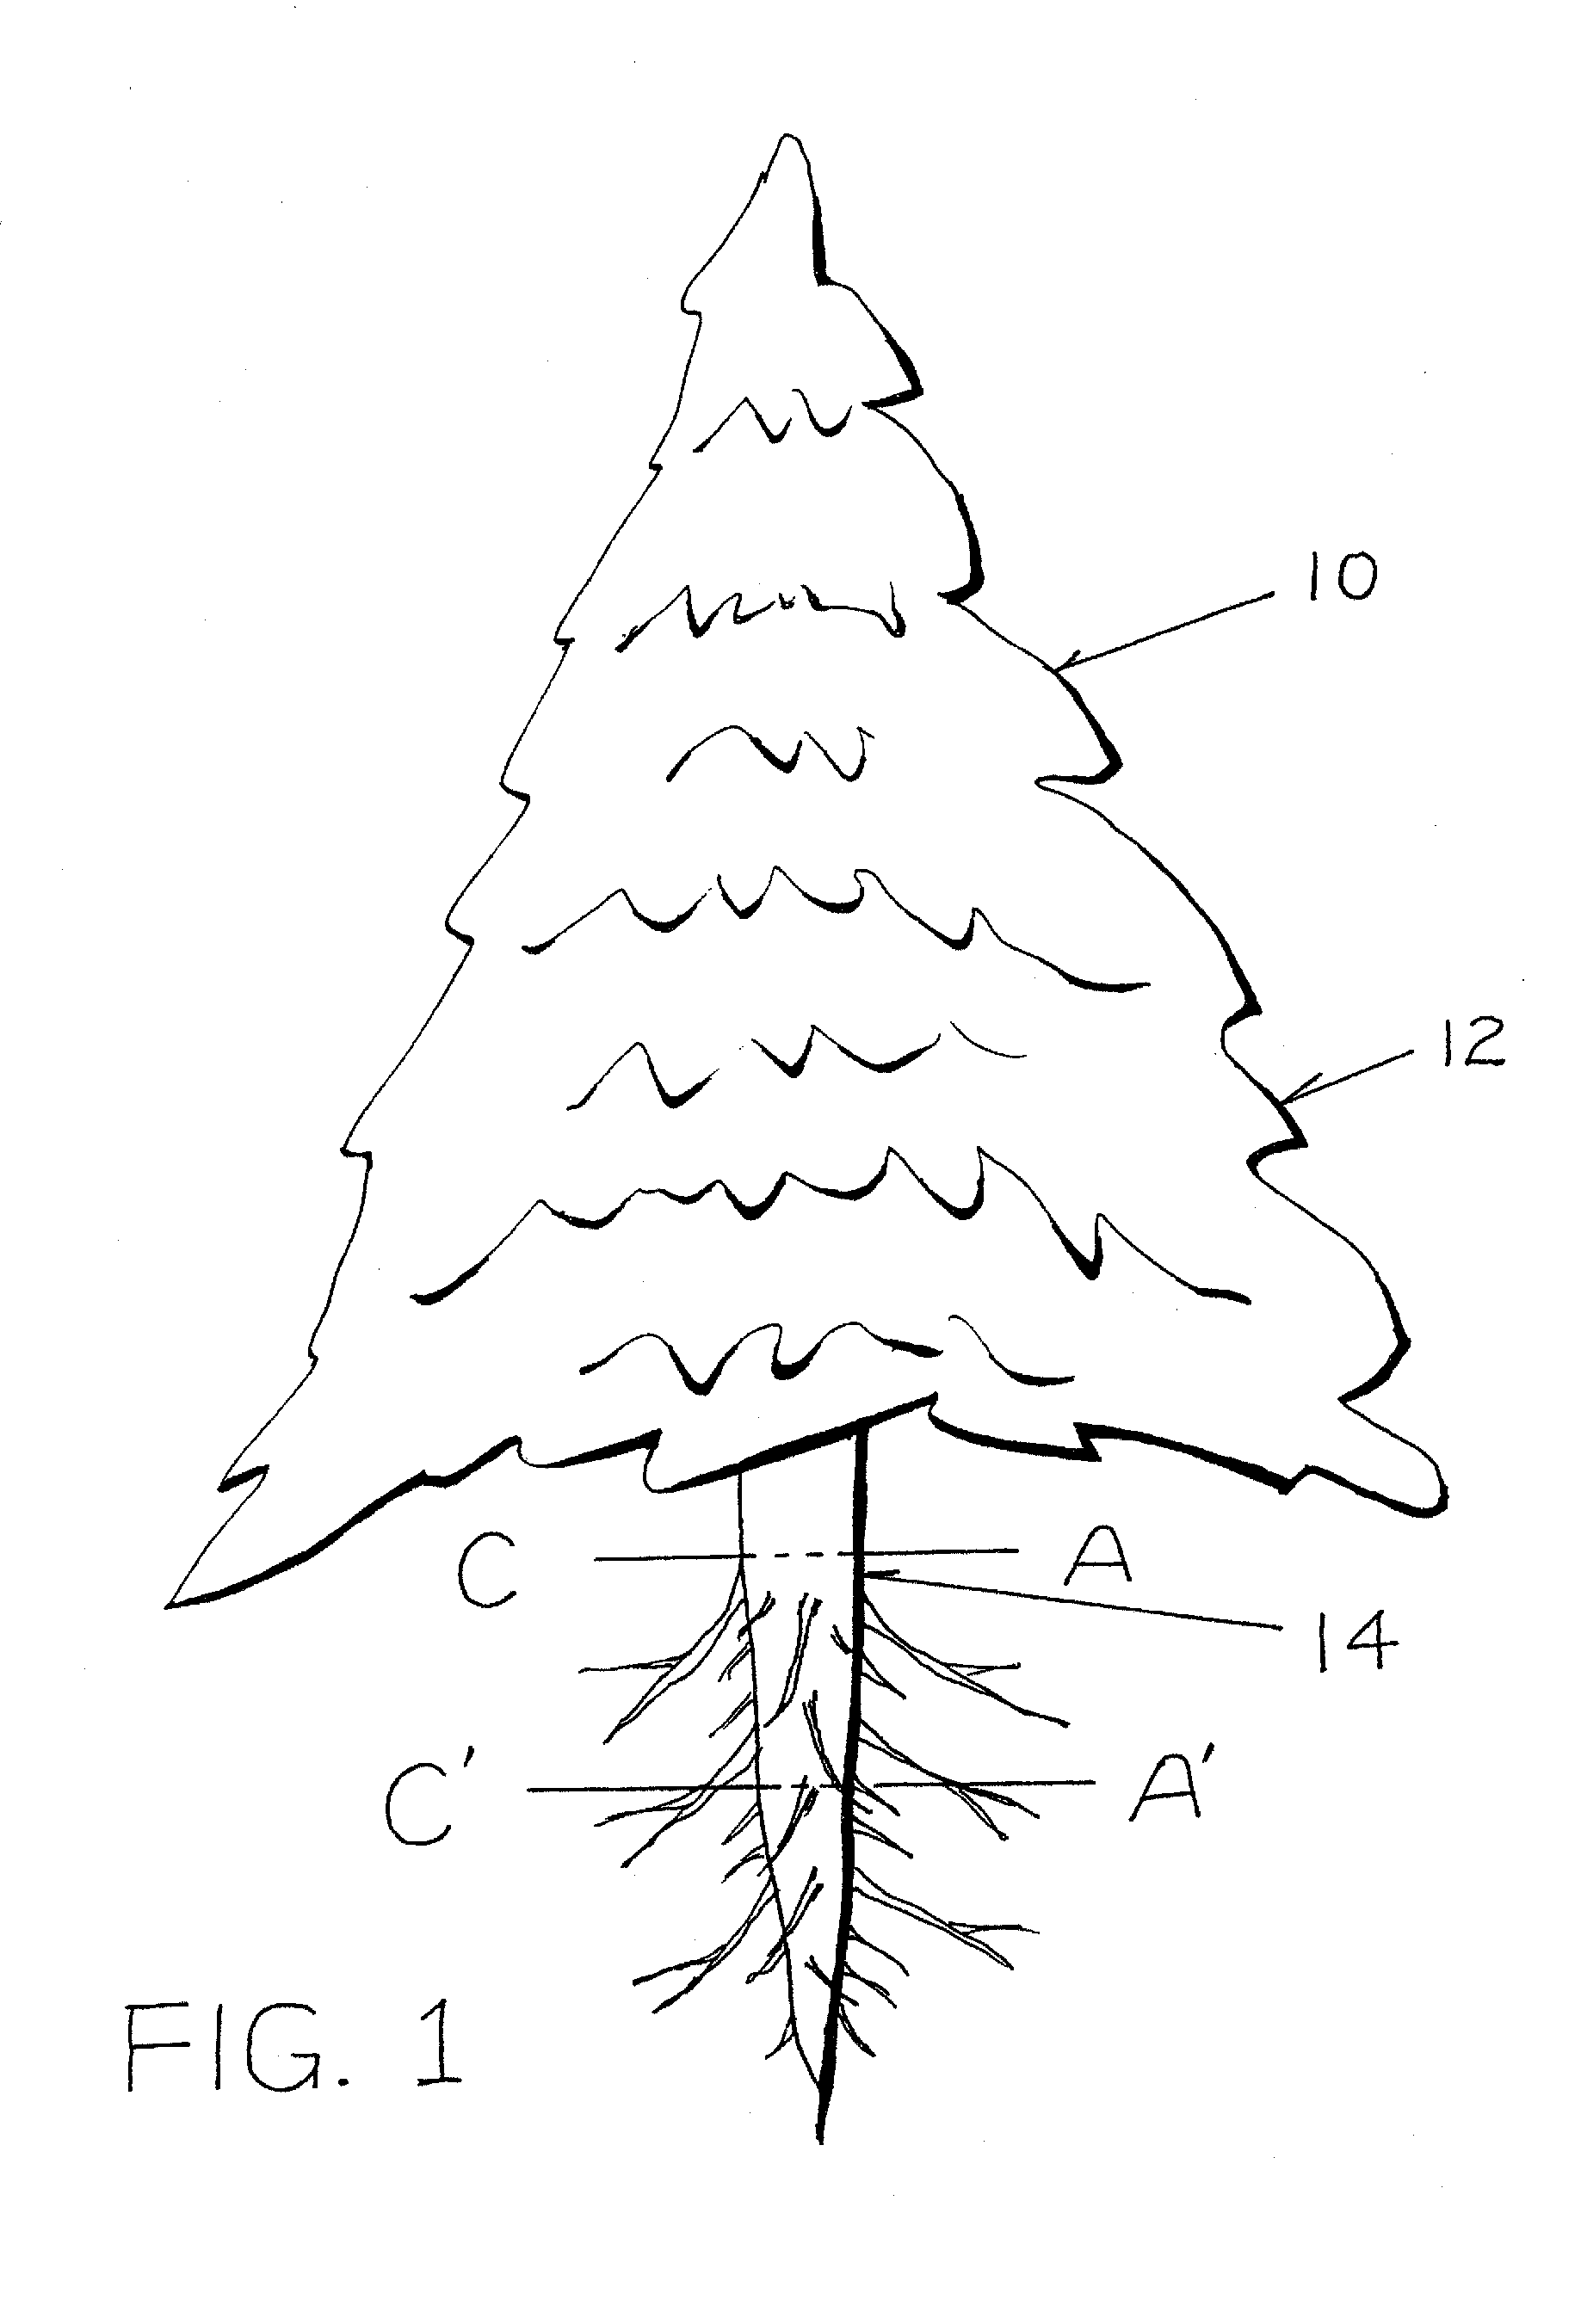 Method of Preserving a Live Tree